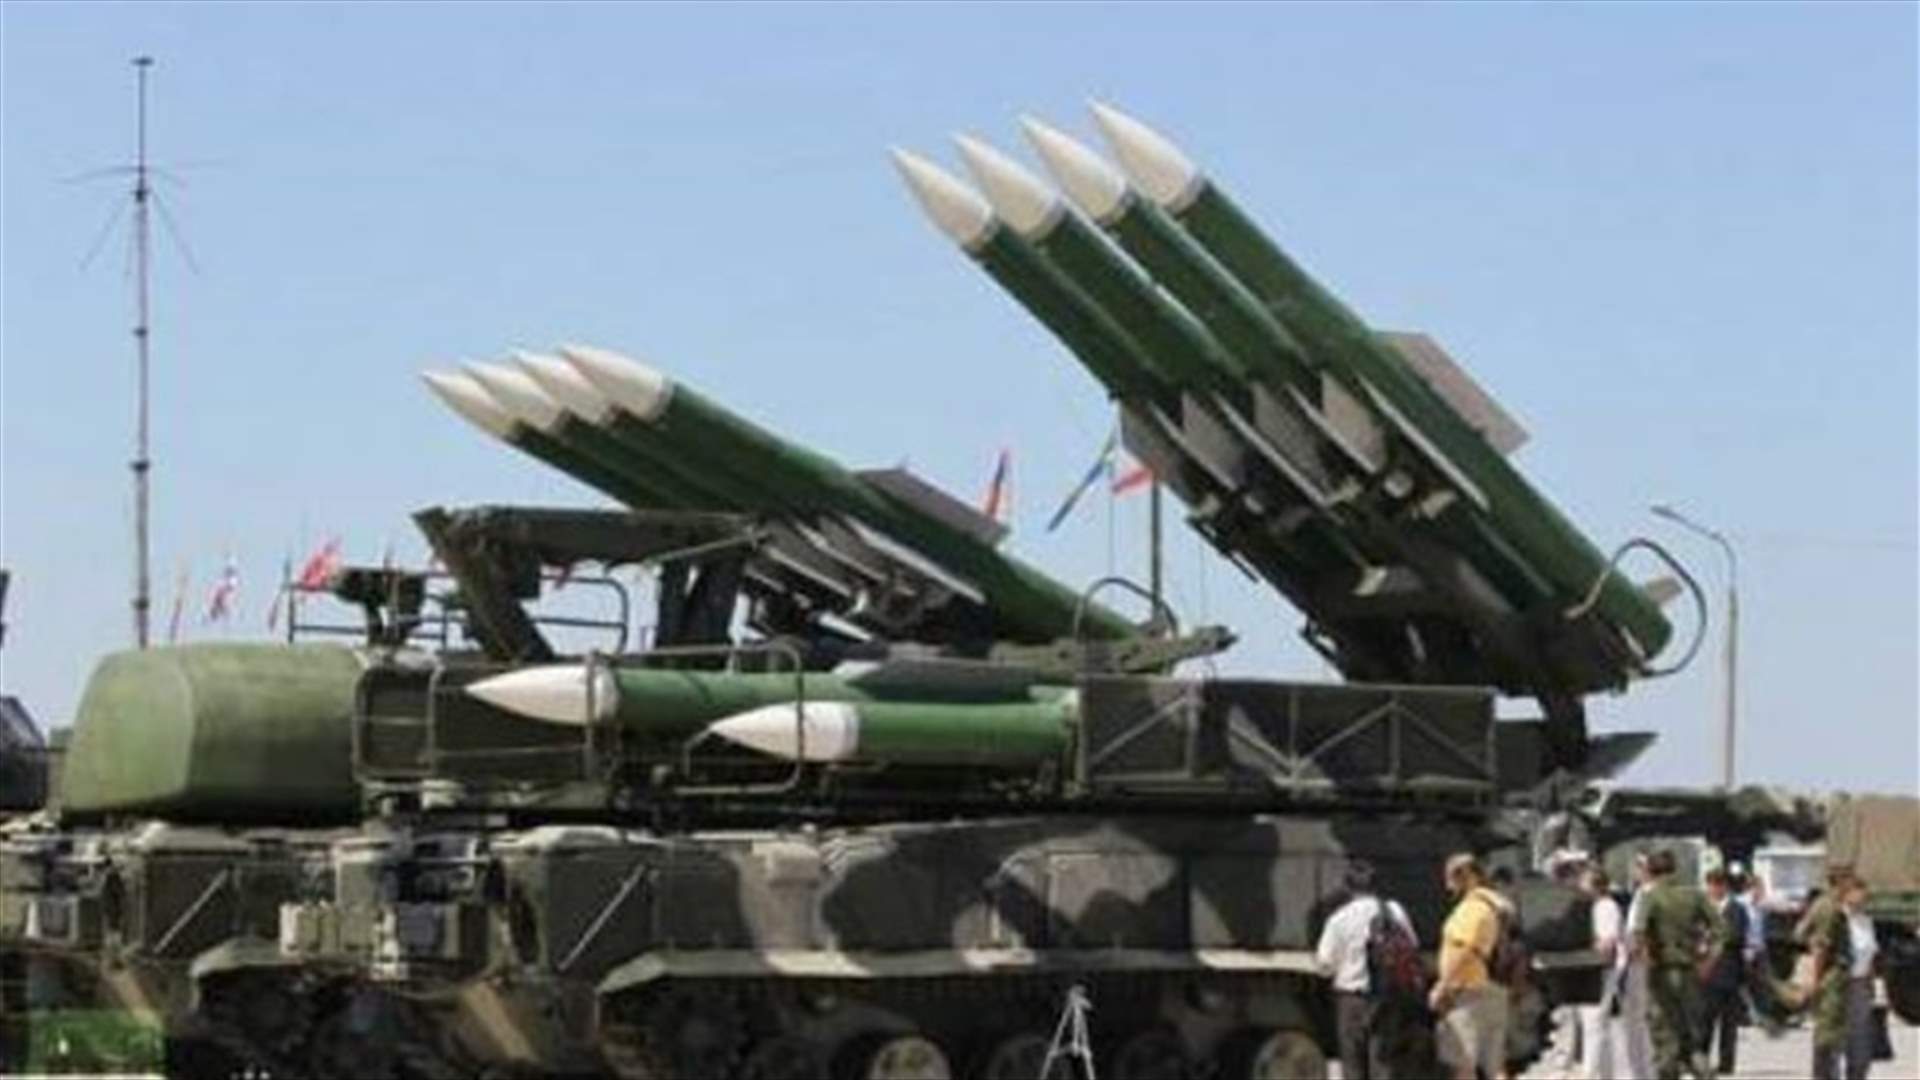 Russia and Iran in talks over $10 bln arms deal - RIA